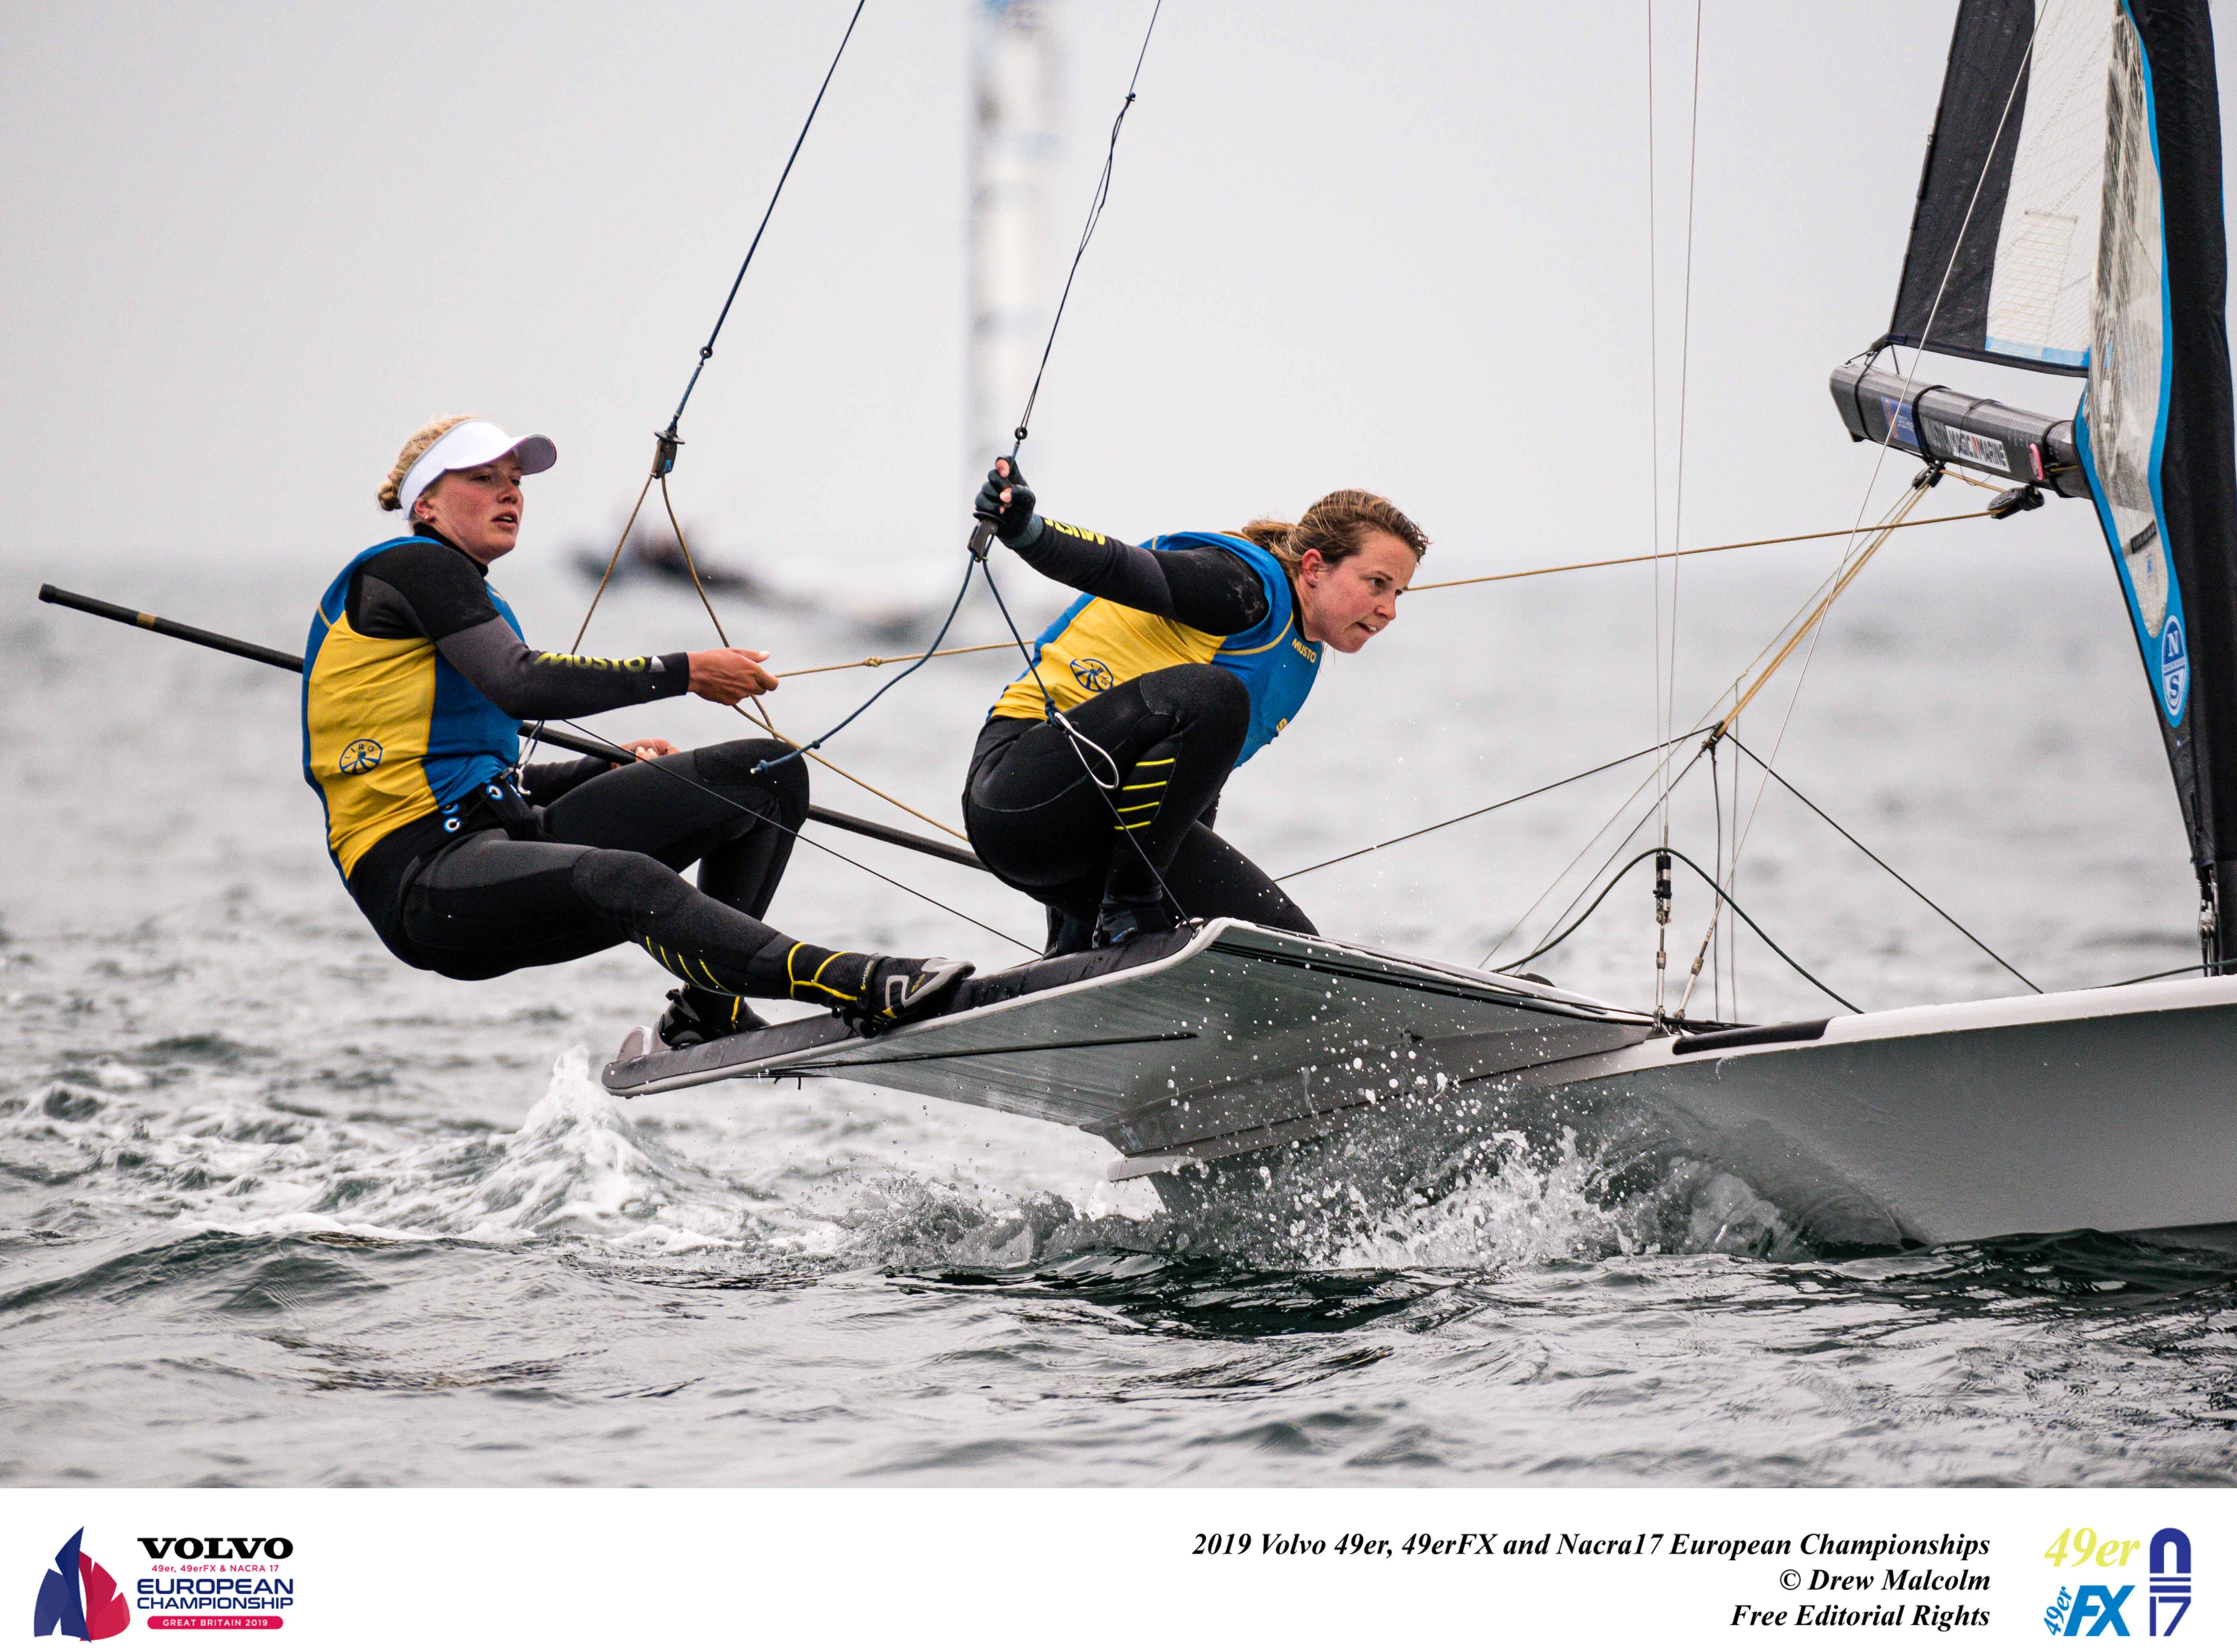 49erFX: Scandinavians deliver while the leaders falter